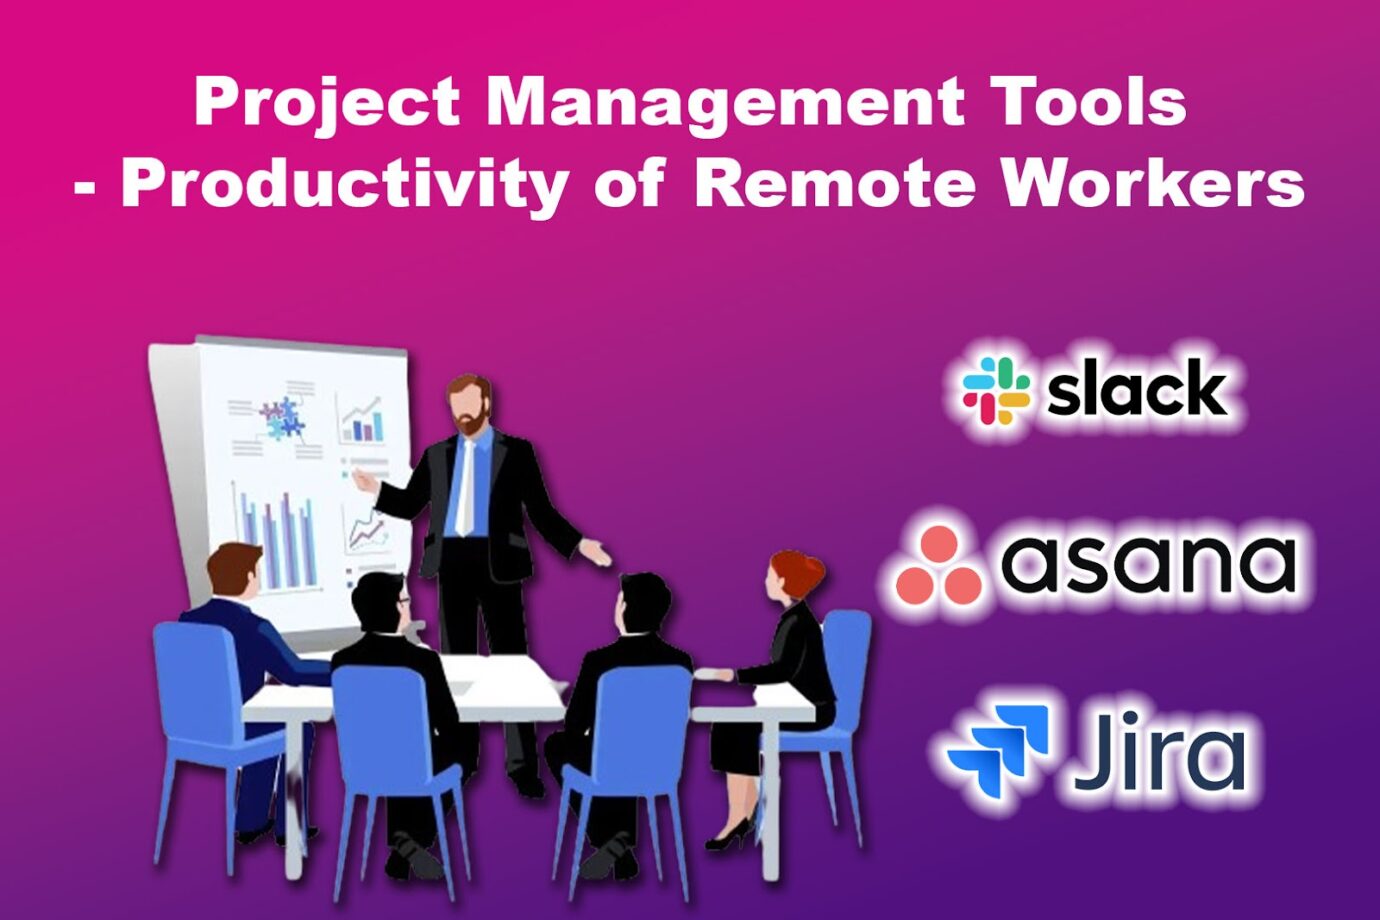 Project Management Tools - Productivity of Remote Workers